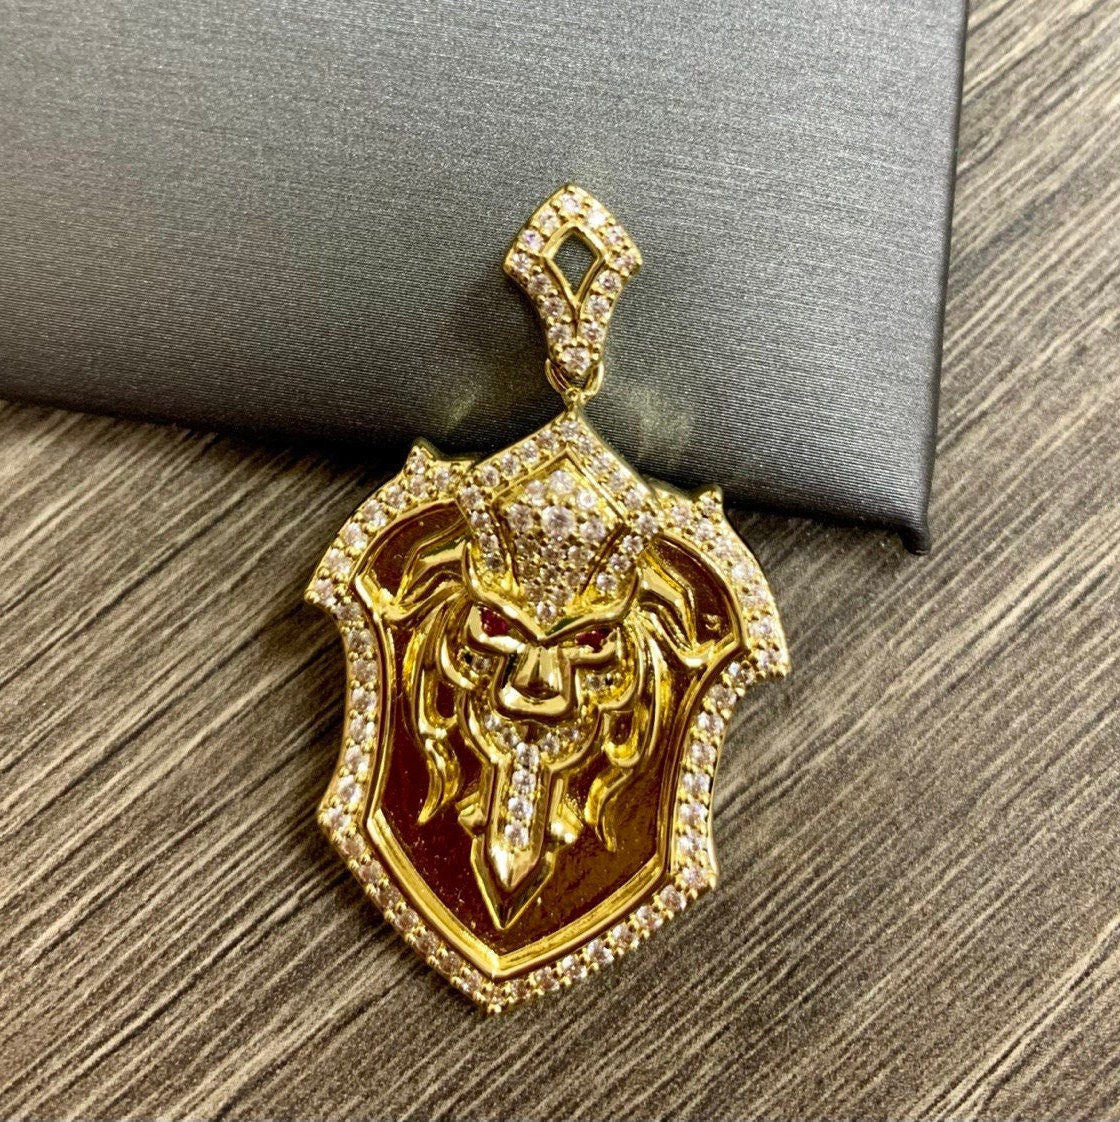 18k Gold Filled Cubic Zirconia Royal Lion Head Lion with Sword Hip Hop Pendant Charms Men's Jewelry Wholesale Jewelry Making Supplies